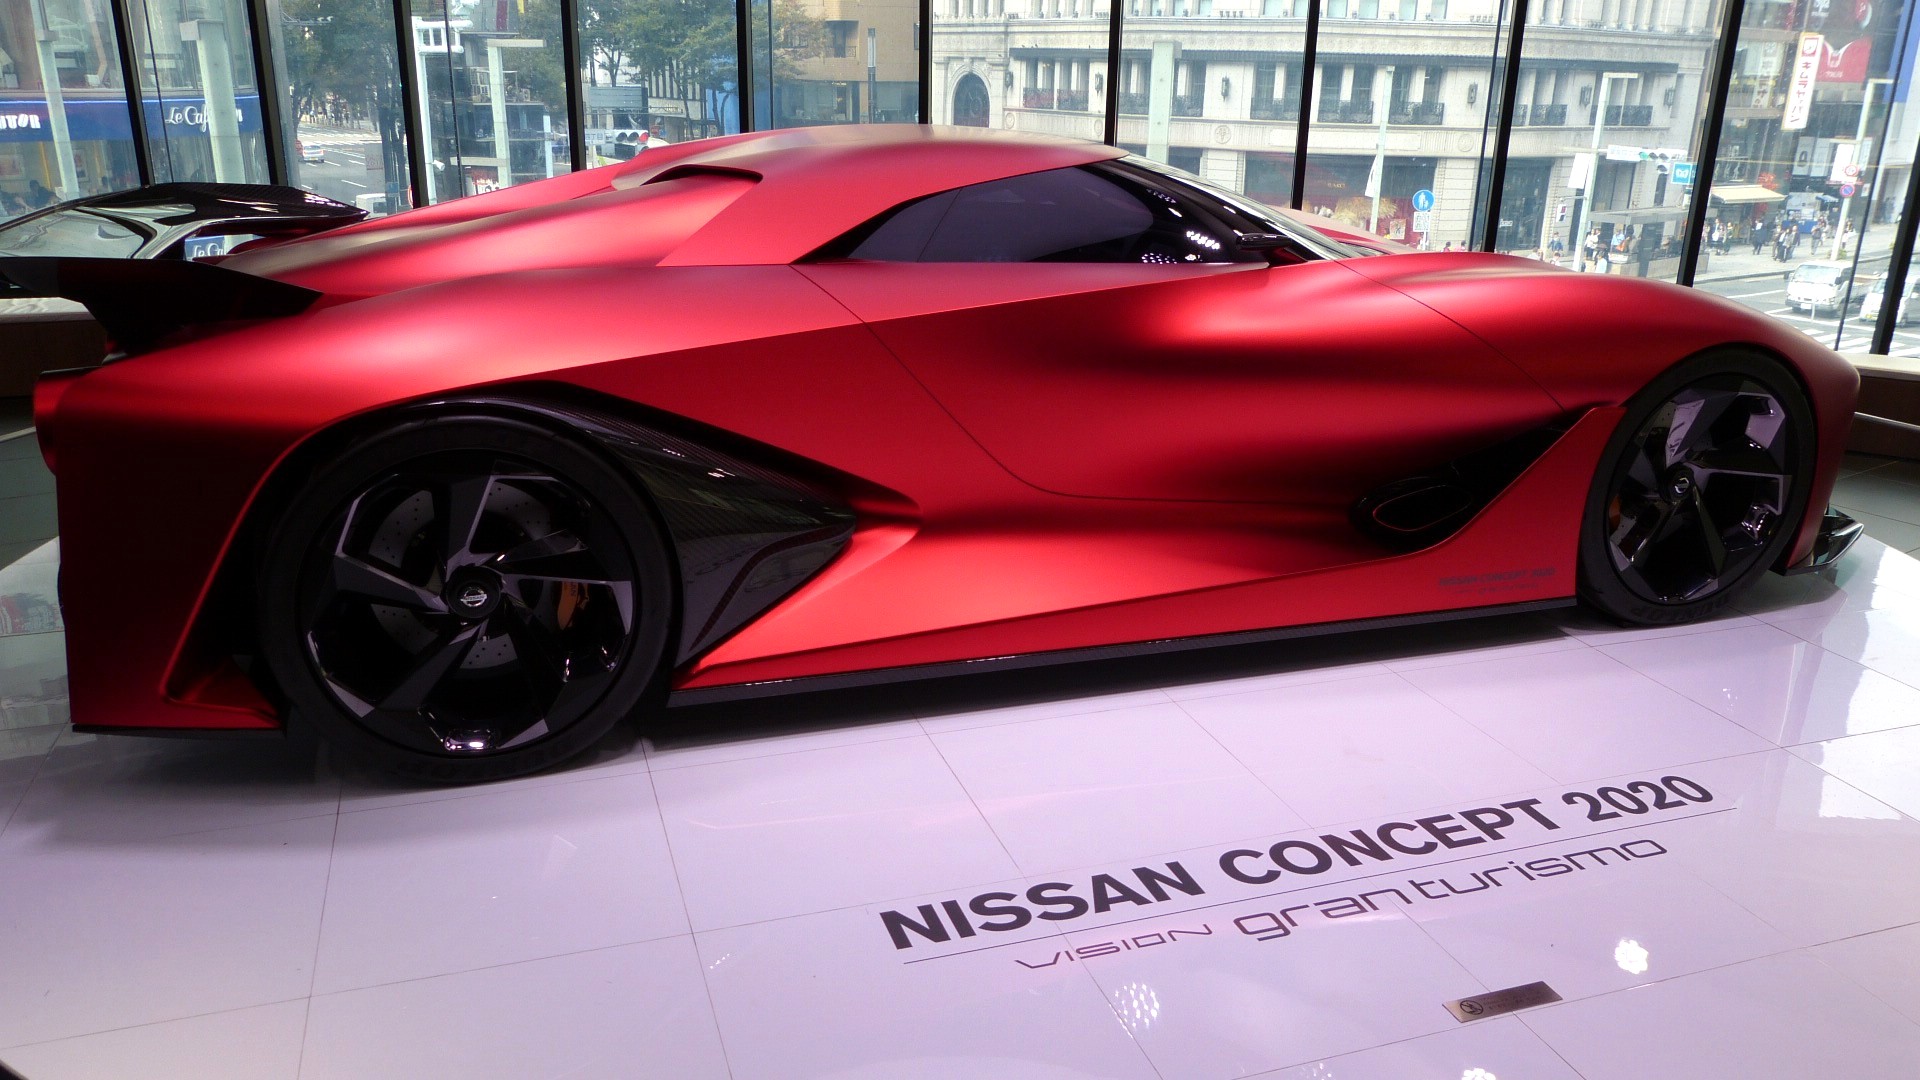 Nissan concept 2020 vision gran turismo in red